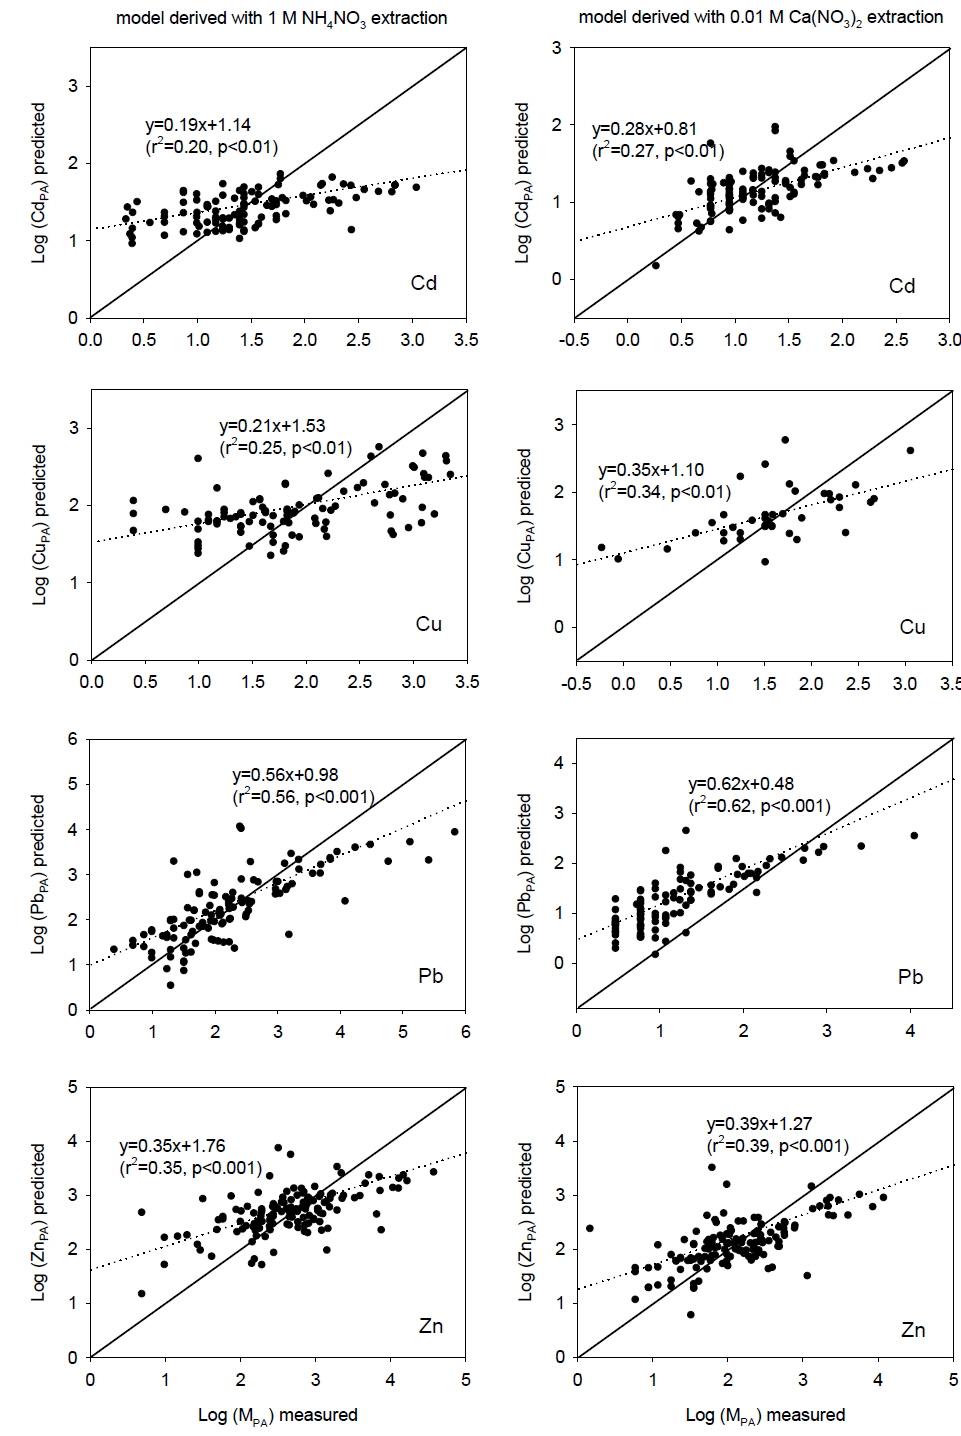 Comparison of measured and estimated phytoavailable metal concentrations using transfer functions derived in this study for the ‘derivation data set’ (solid line refers to 1:1 fit between measured and estimated values; dotted line refers to linear regression fit between measured and estimated values)